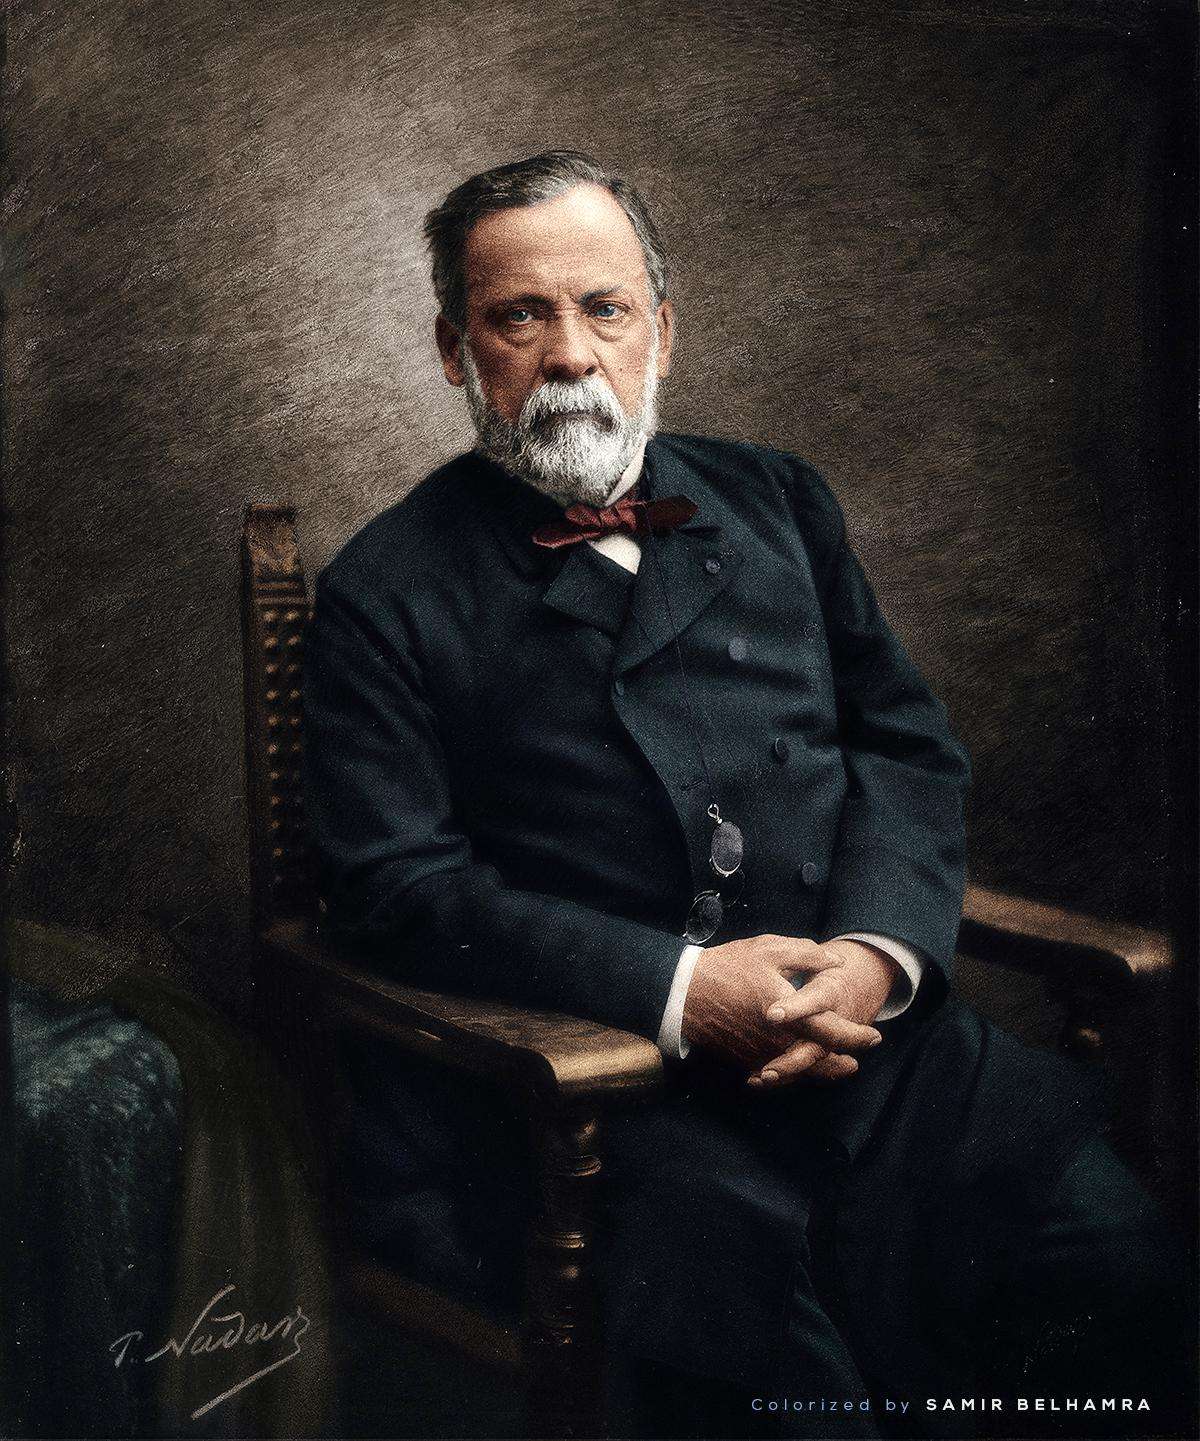 Louis pasteur the father of immunology who invented Rabies vaccine